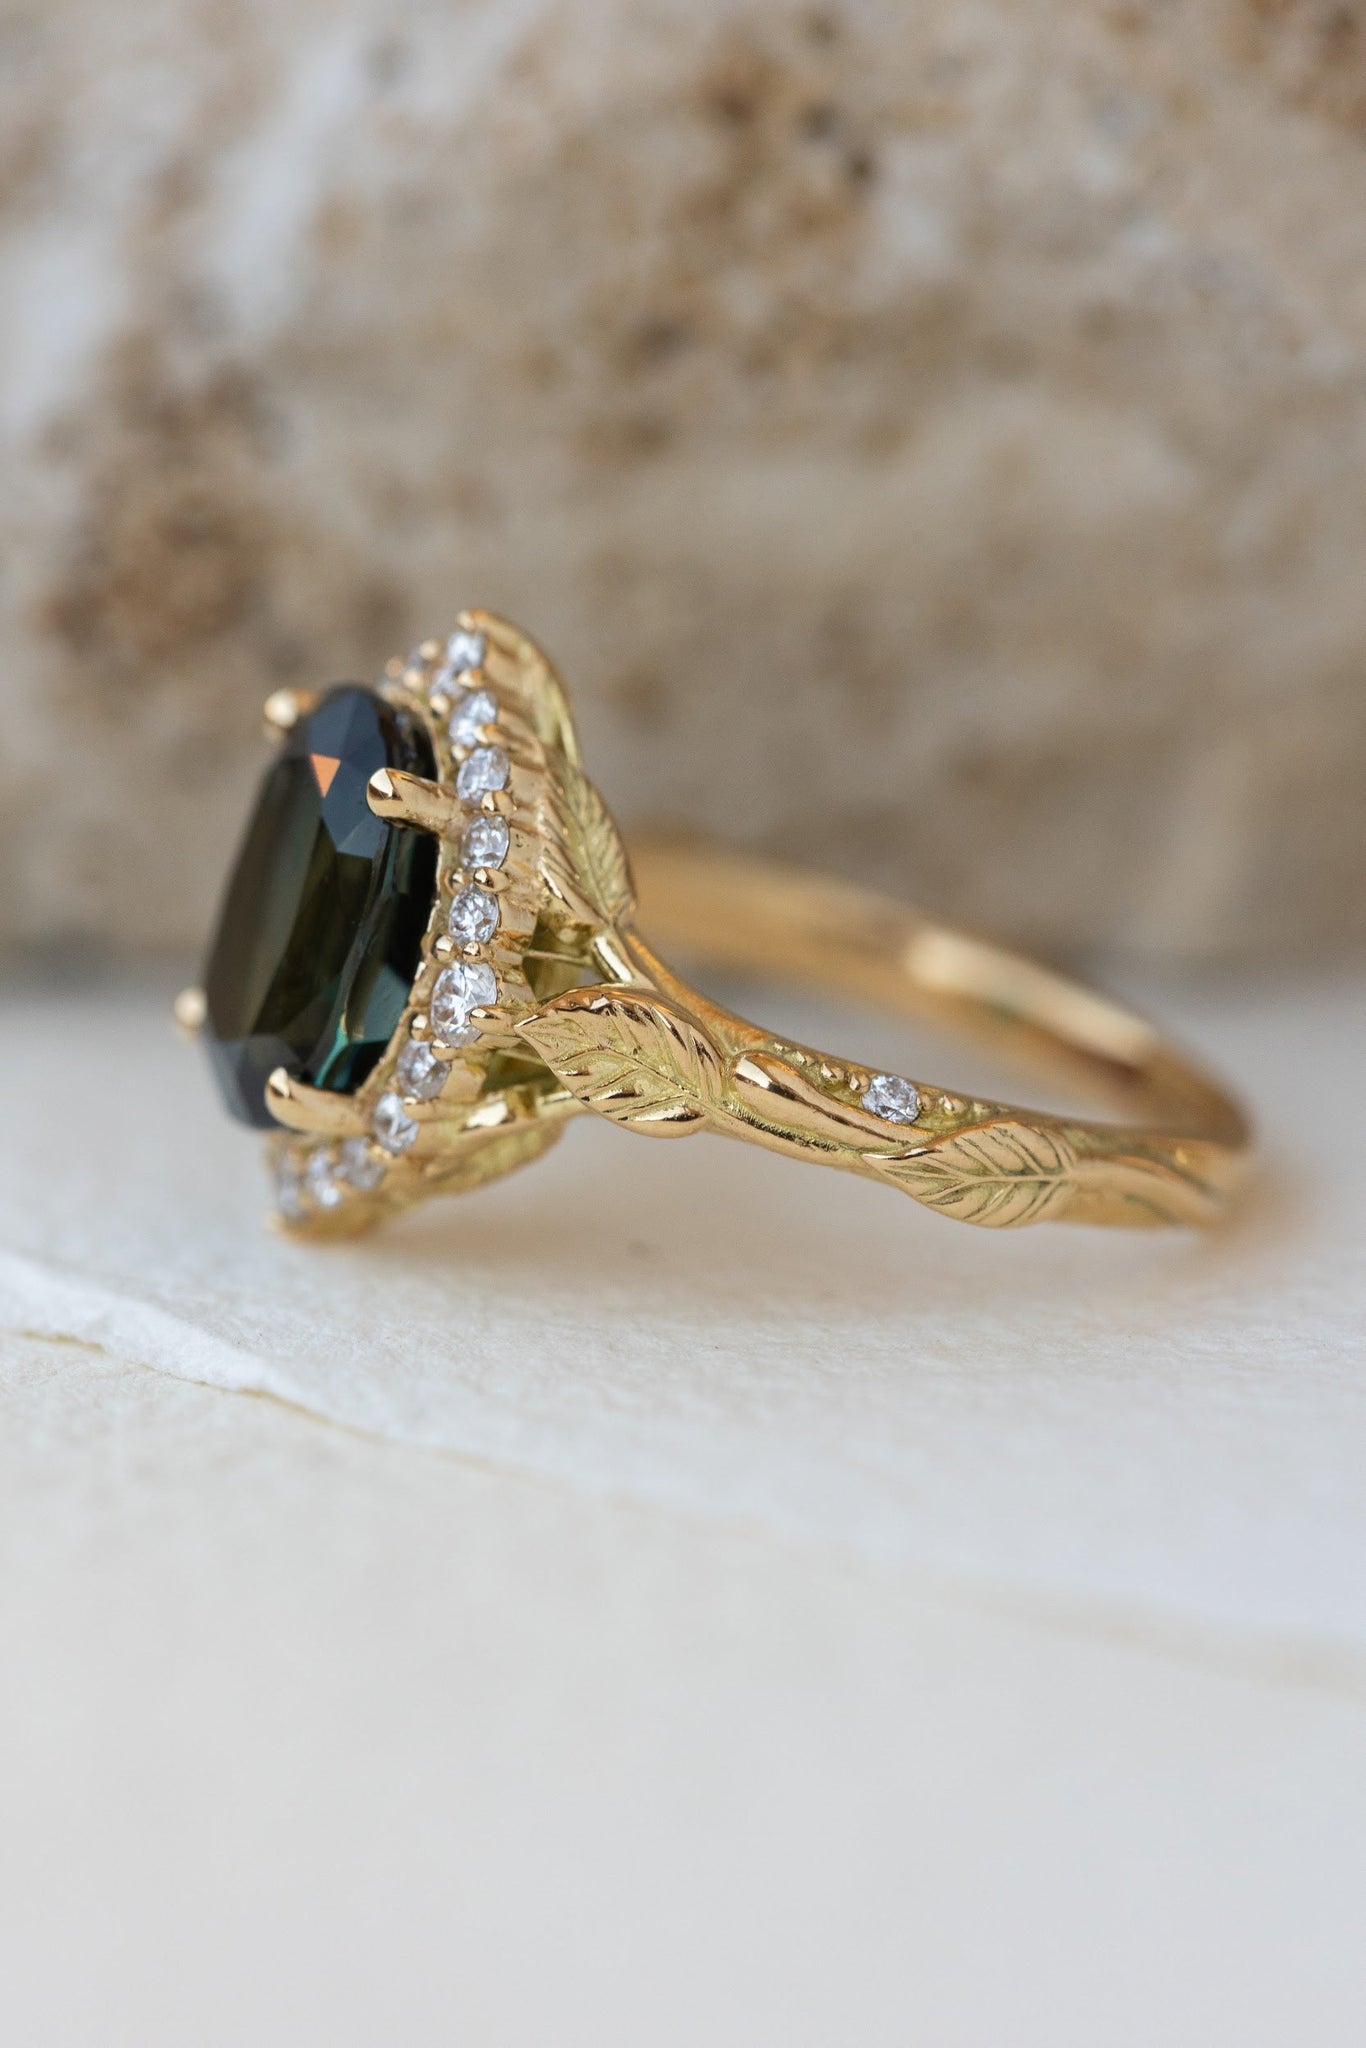 Diamond halo and natural teal sapphire engagement ring, nature inspired yellow gold ring / Florentina - Eden Garden Jewelry™